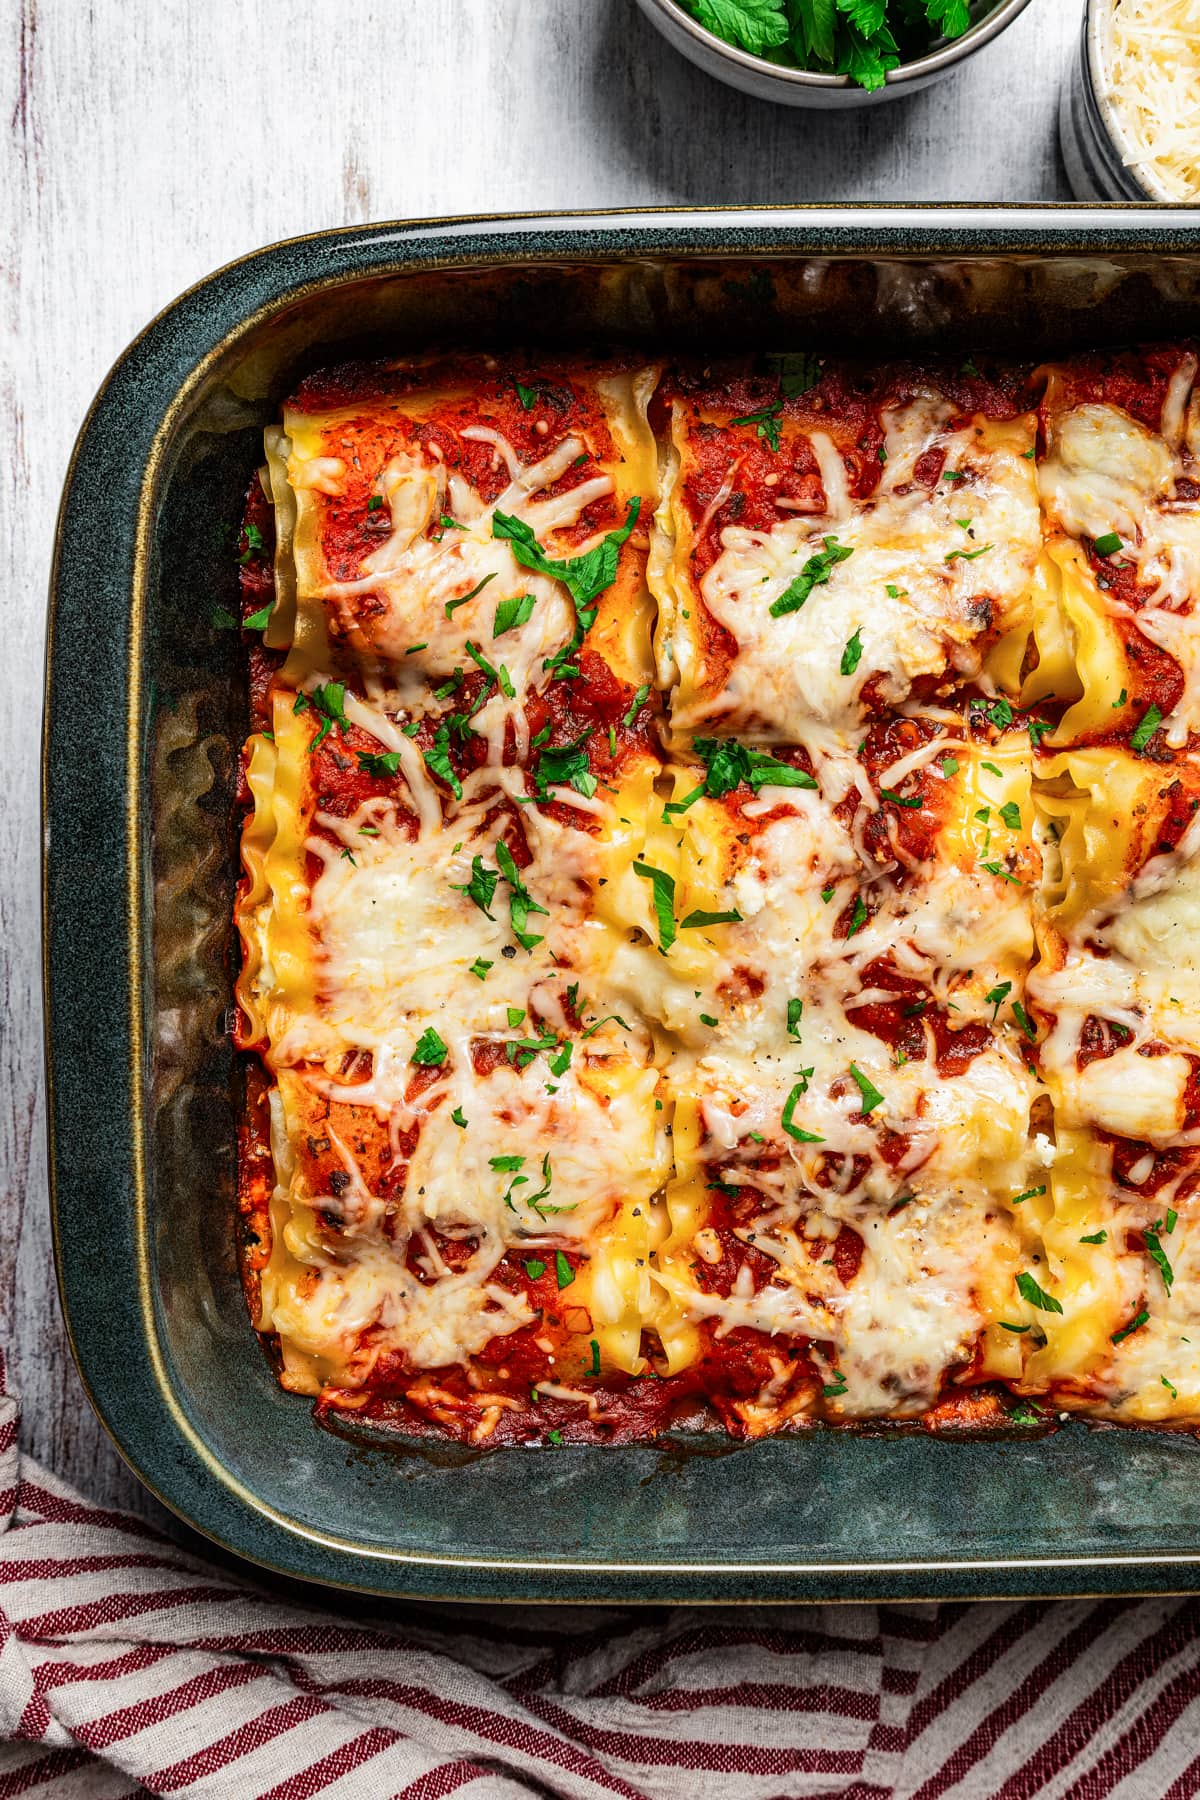 Overhead view of baked lasagna roll ups in a baking pan.